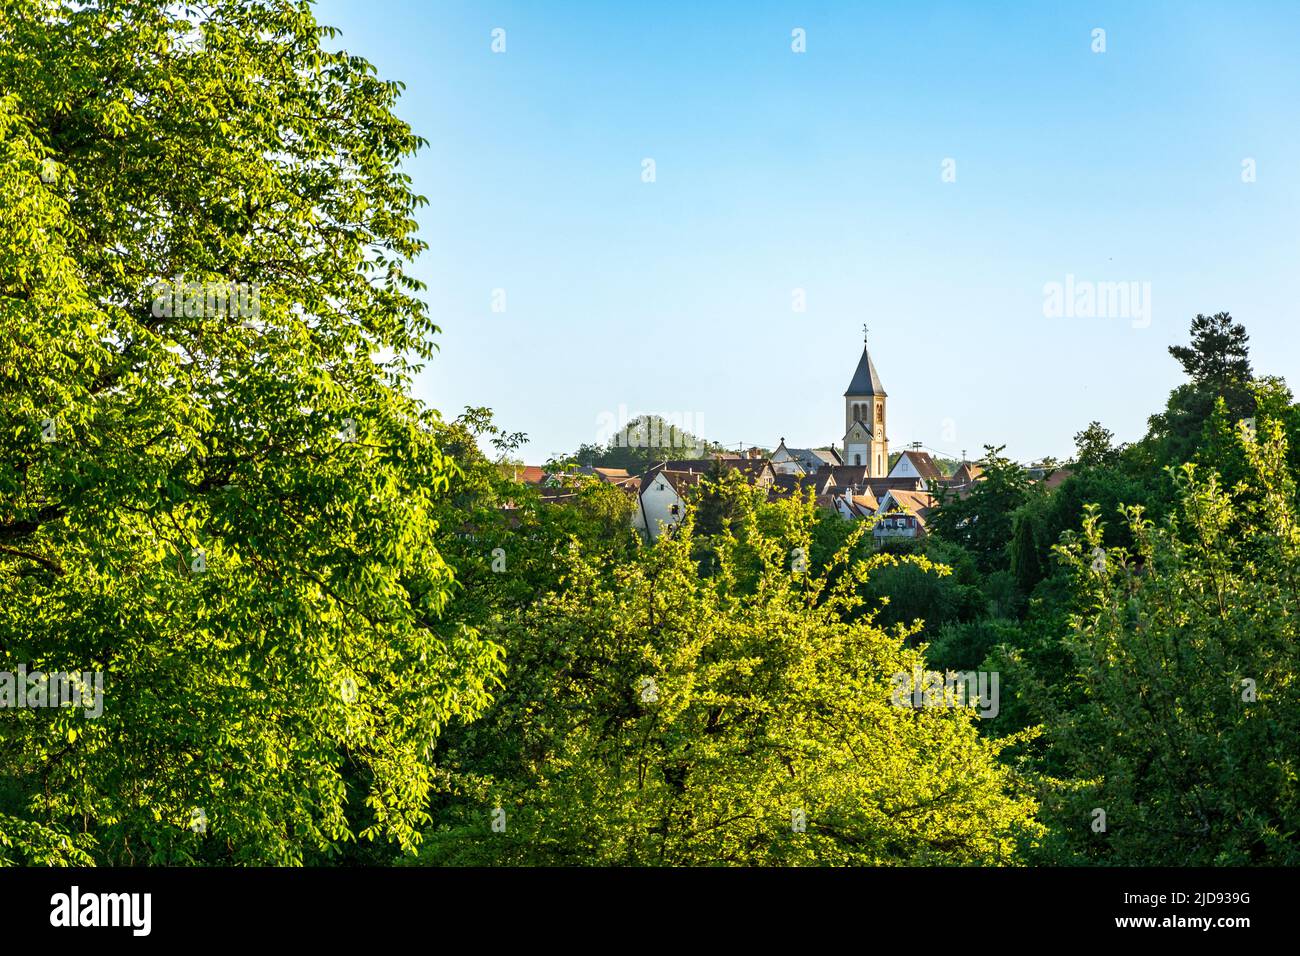 Picturesque small historic village seen trough green trees in summer in Southern Germany Stock Photo